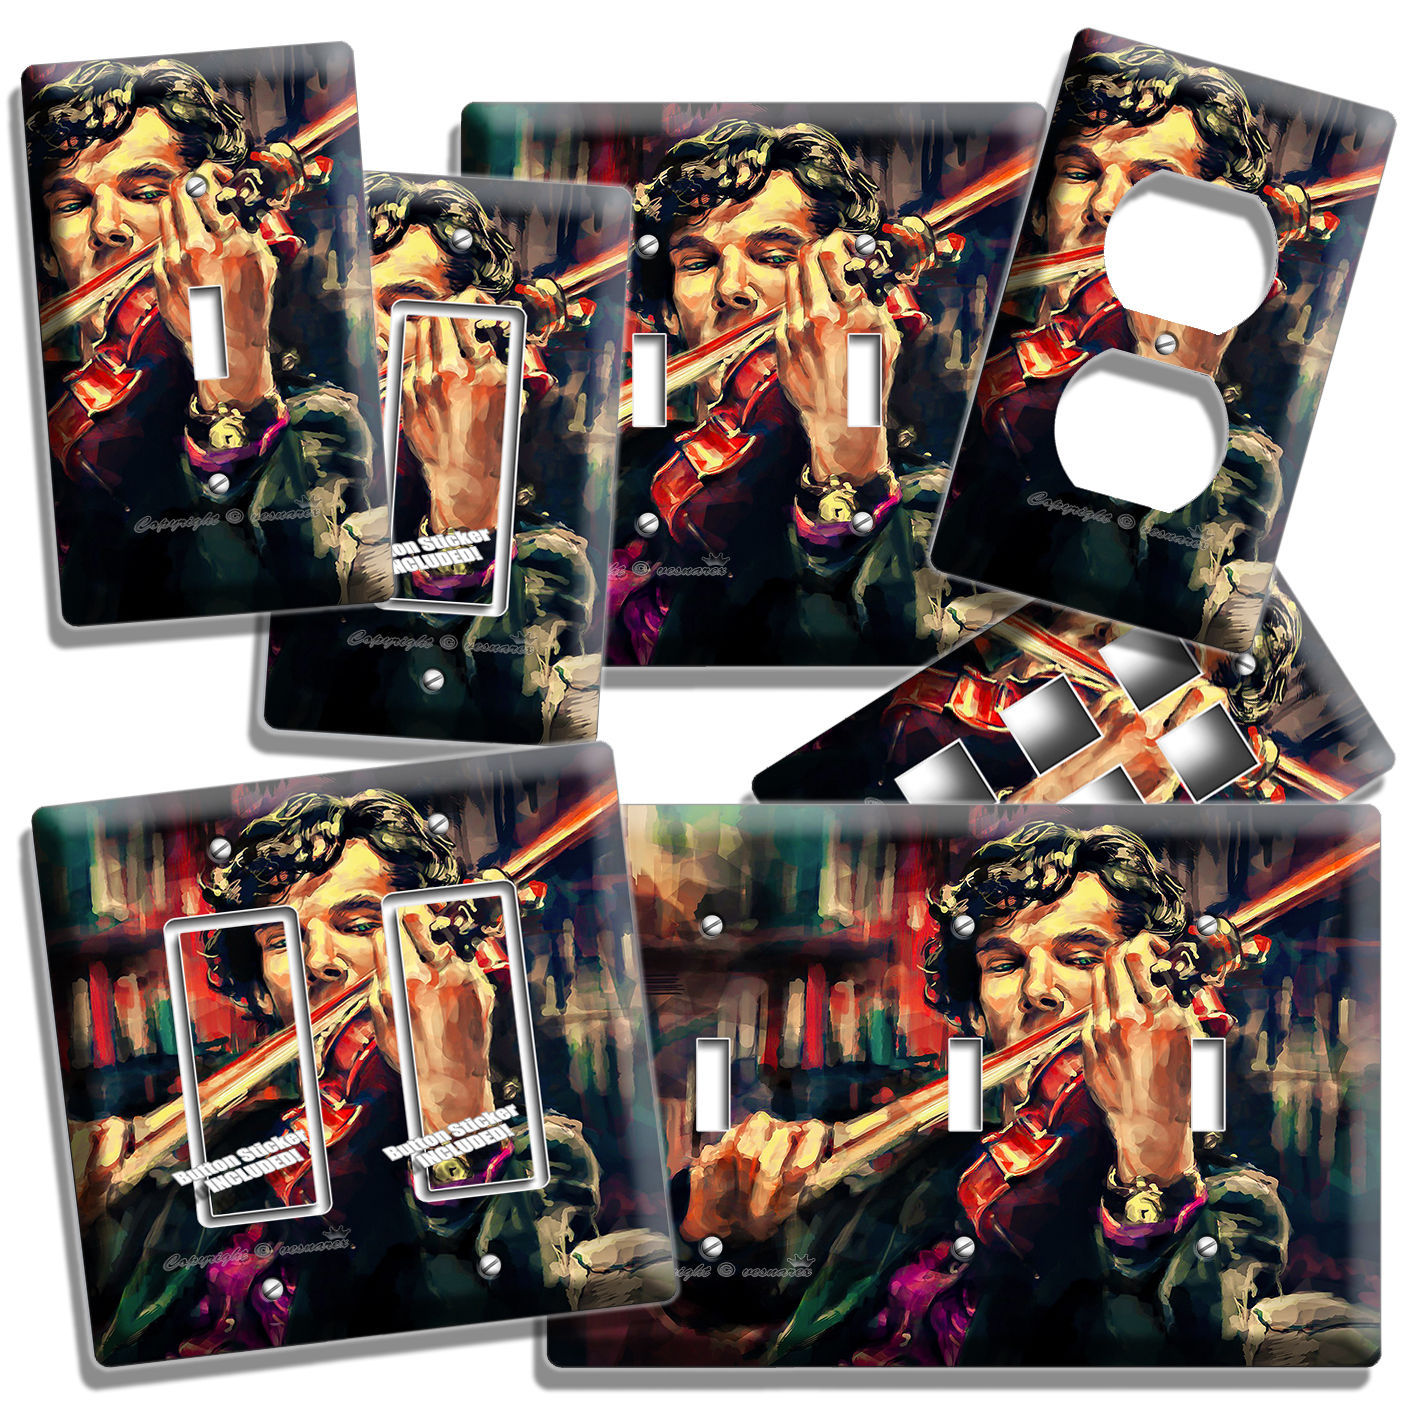 SHERLOCK HOLMES VIOLIN BENEDICT CUMBERBATCH LIGHT SWITCH OUTLET WALL ROOM DECOR - $17.99 - $29.99